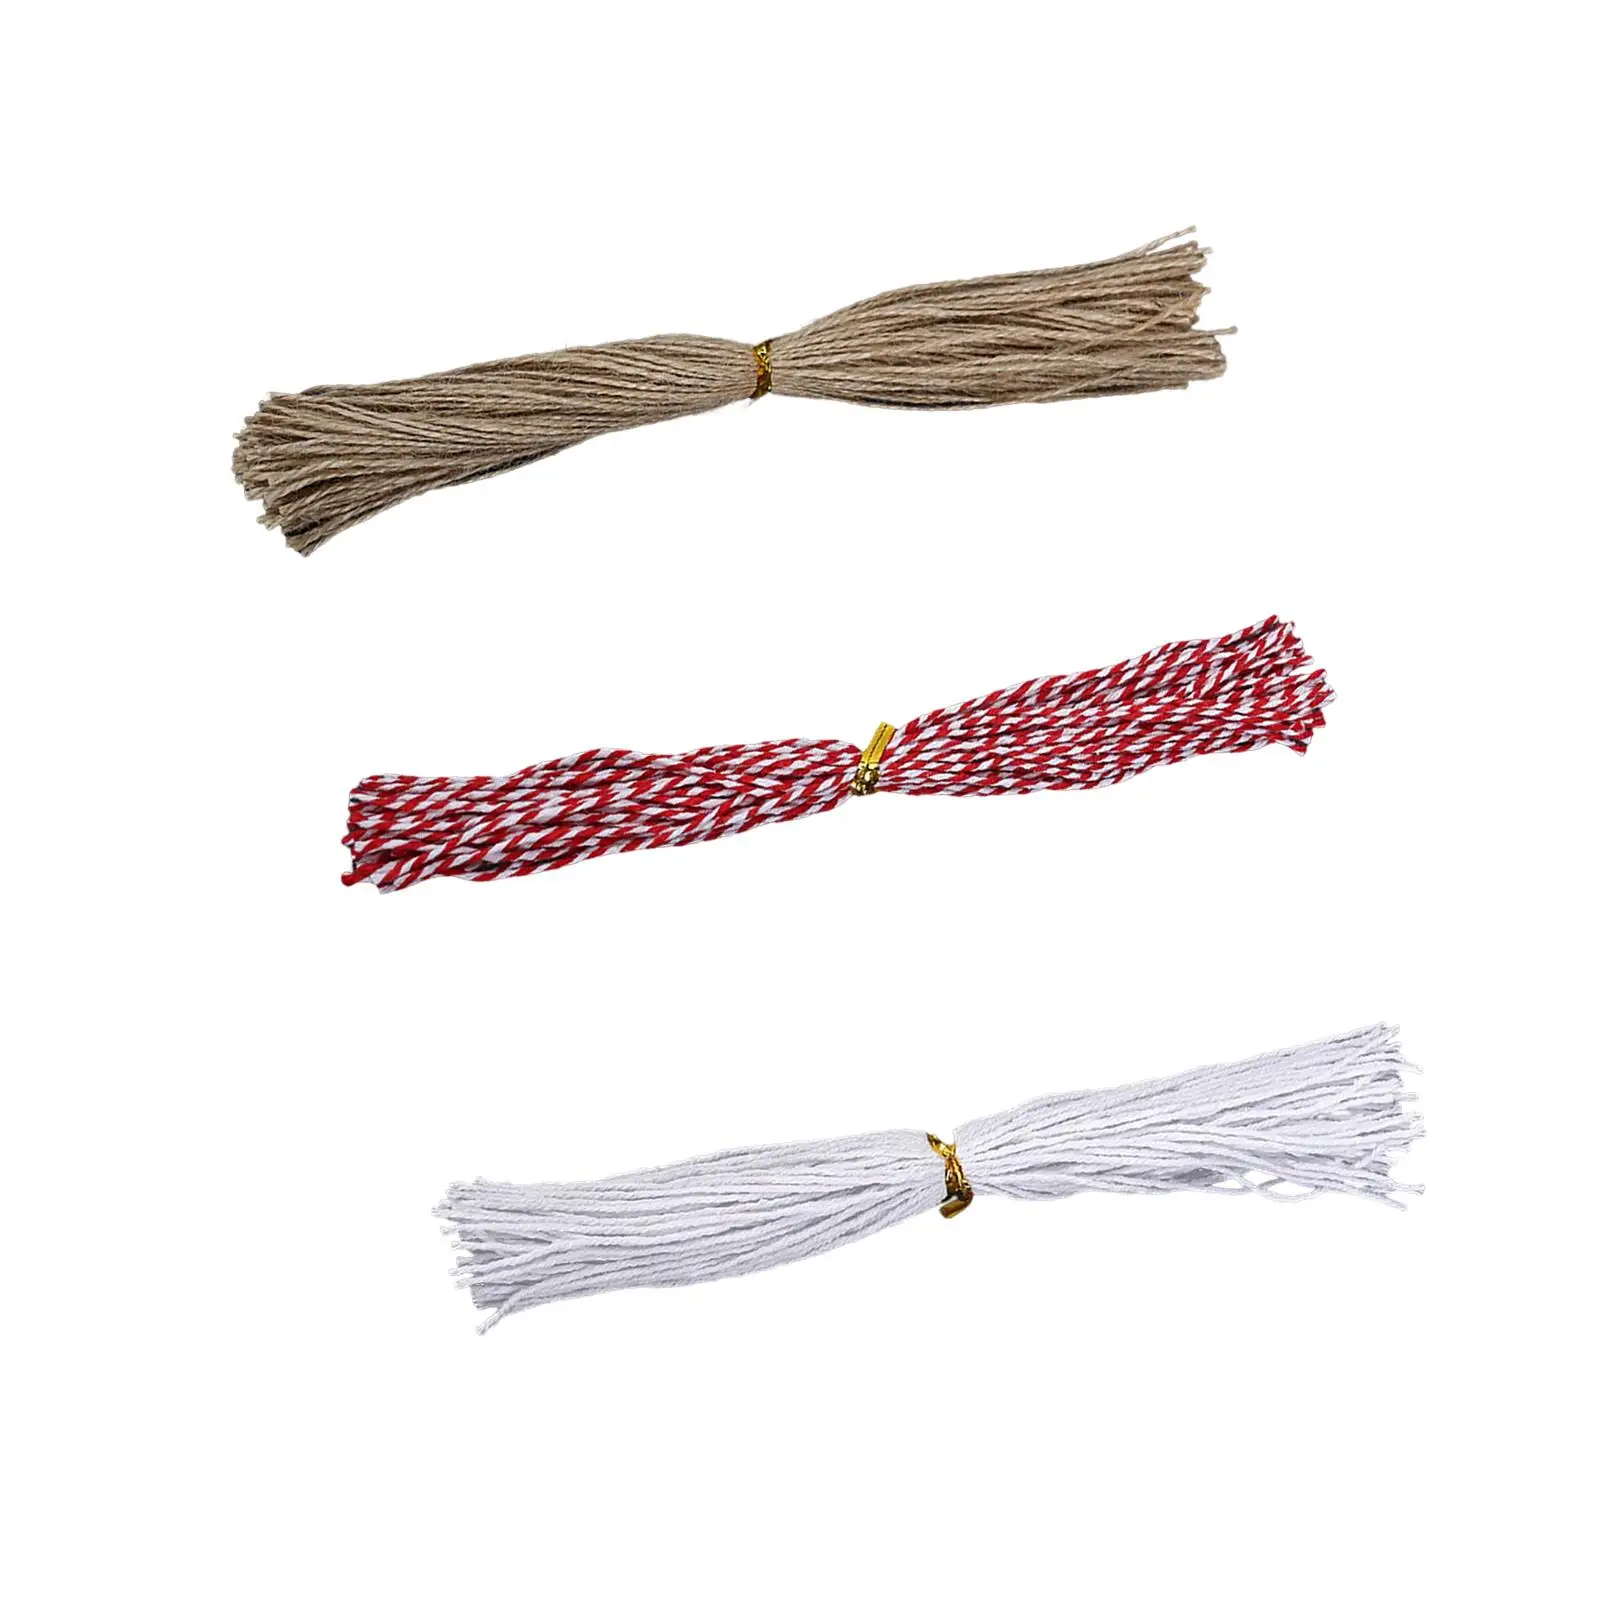 1.5mm Jute Twine Gift Wrapping Twine Durable Rope Present Wrapping Cord for Tags DIY Crafts Gift Wrap Artworks Cards